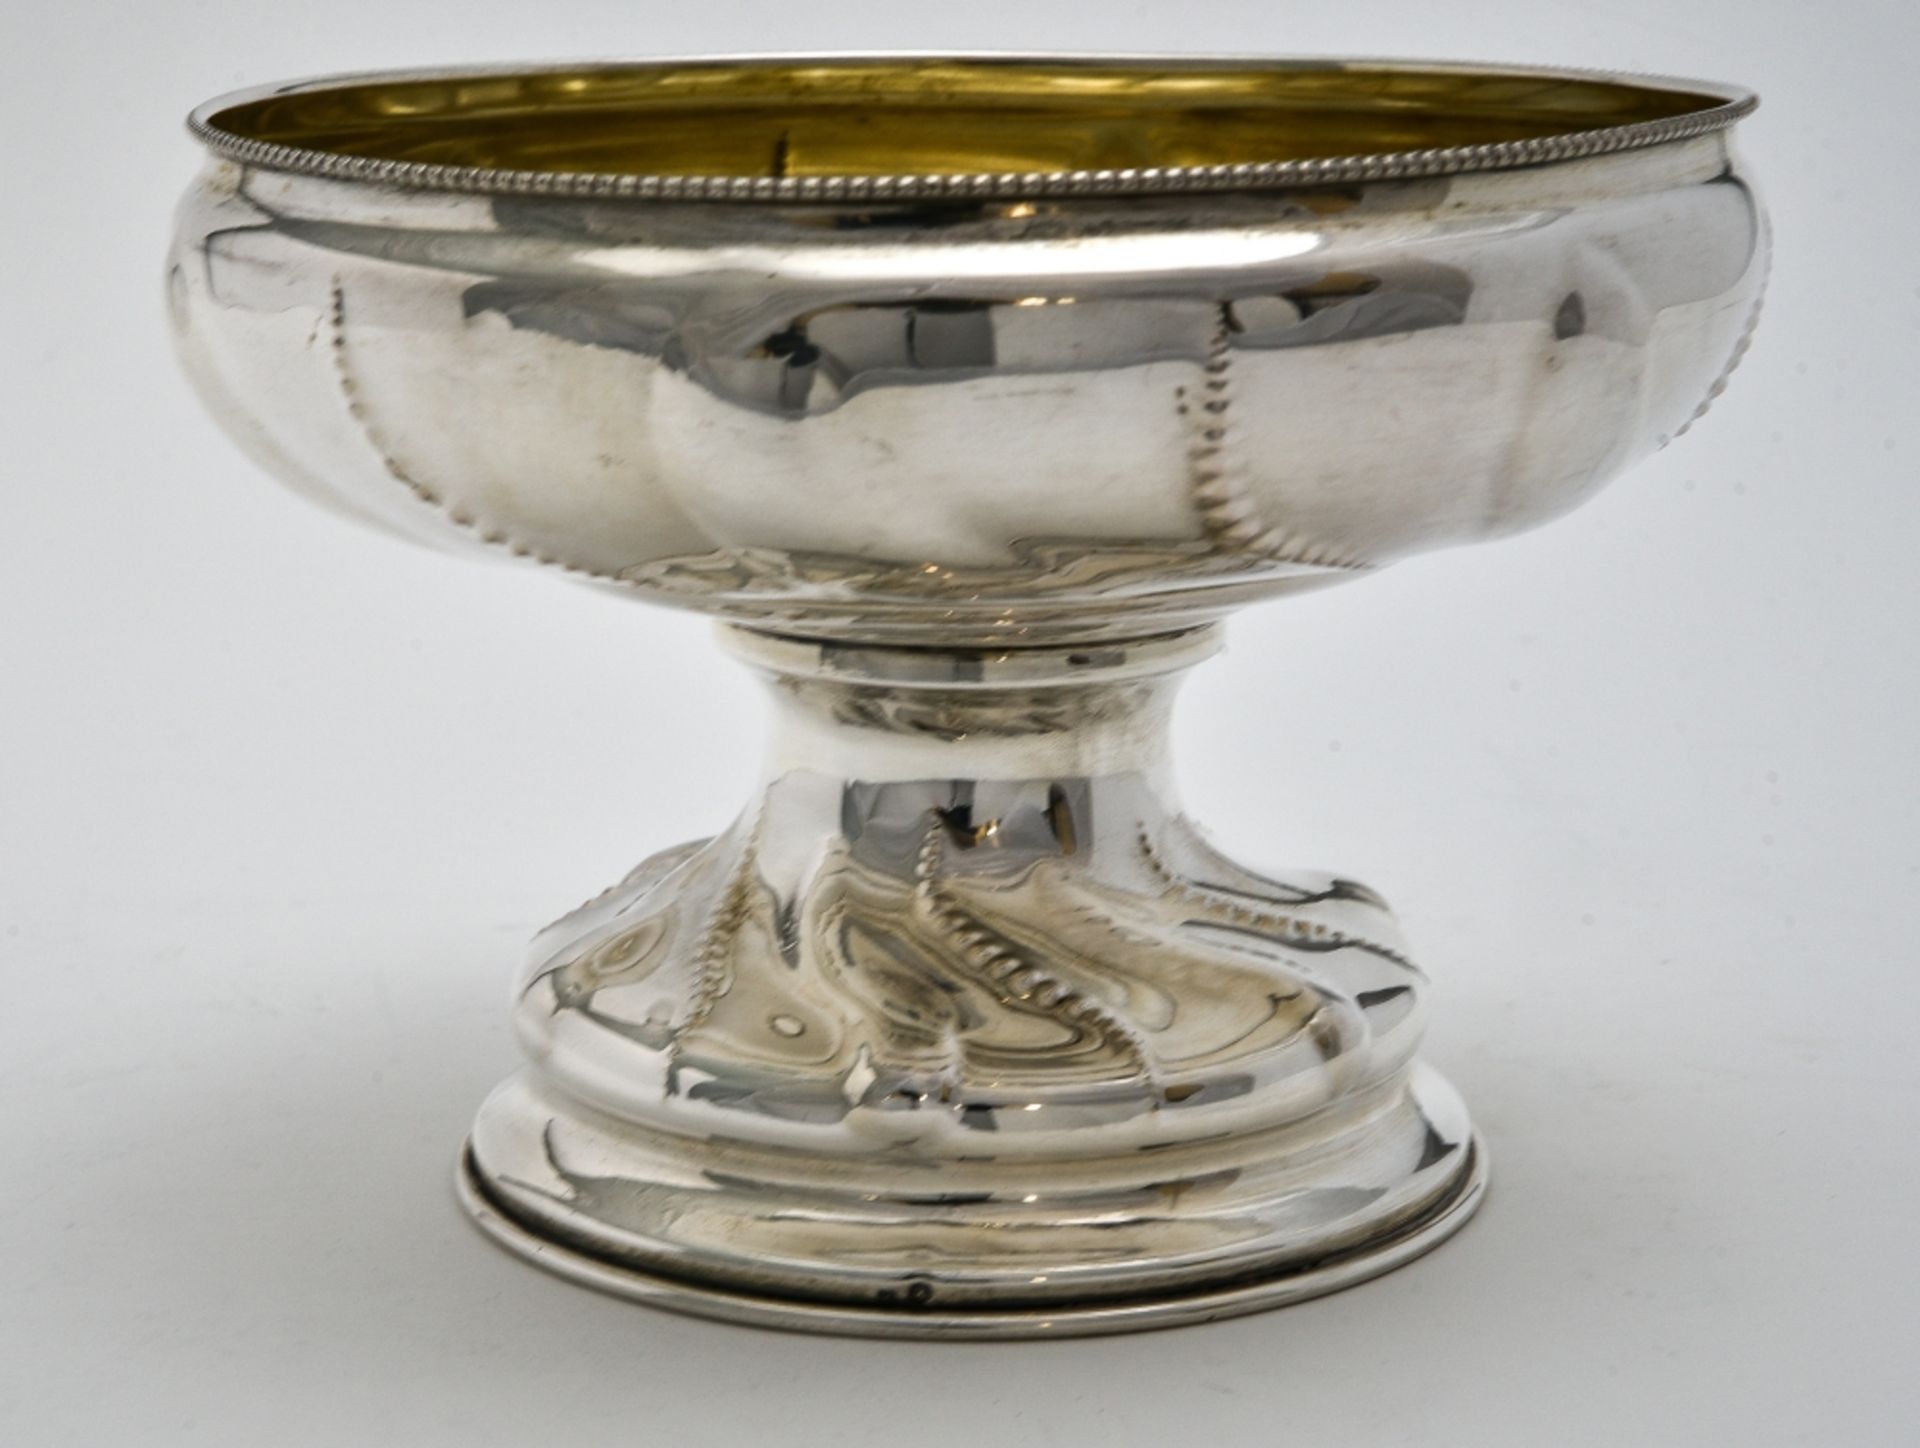 Large footed bowl AUSTRIA-HUNGARY, LATE 19TH CENTURY 800 silver with vermeil interior. Hallmark - Image 2 of 2